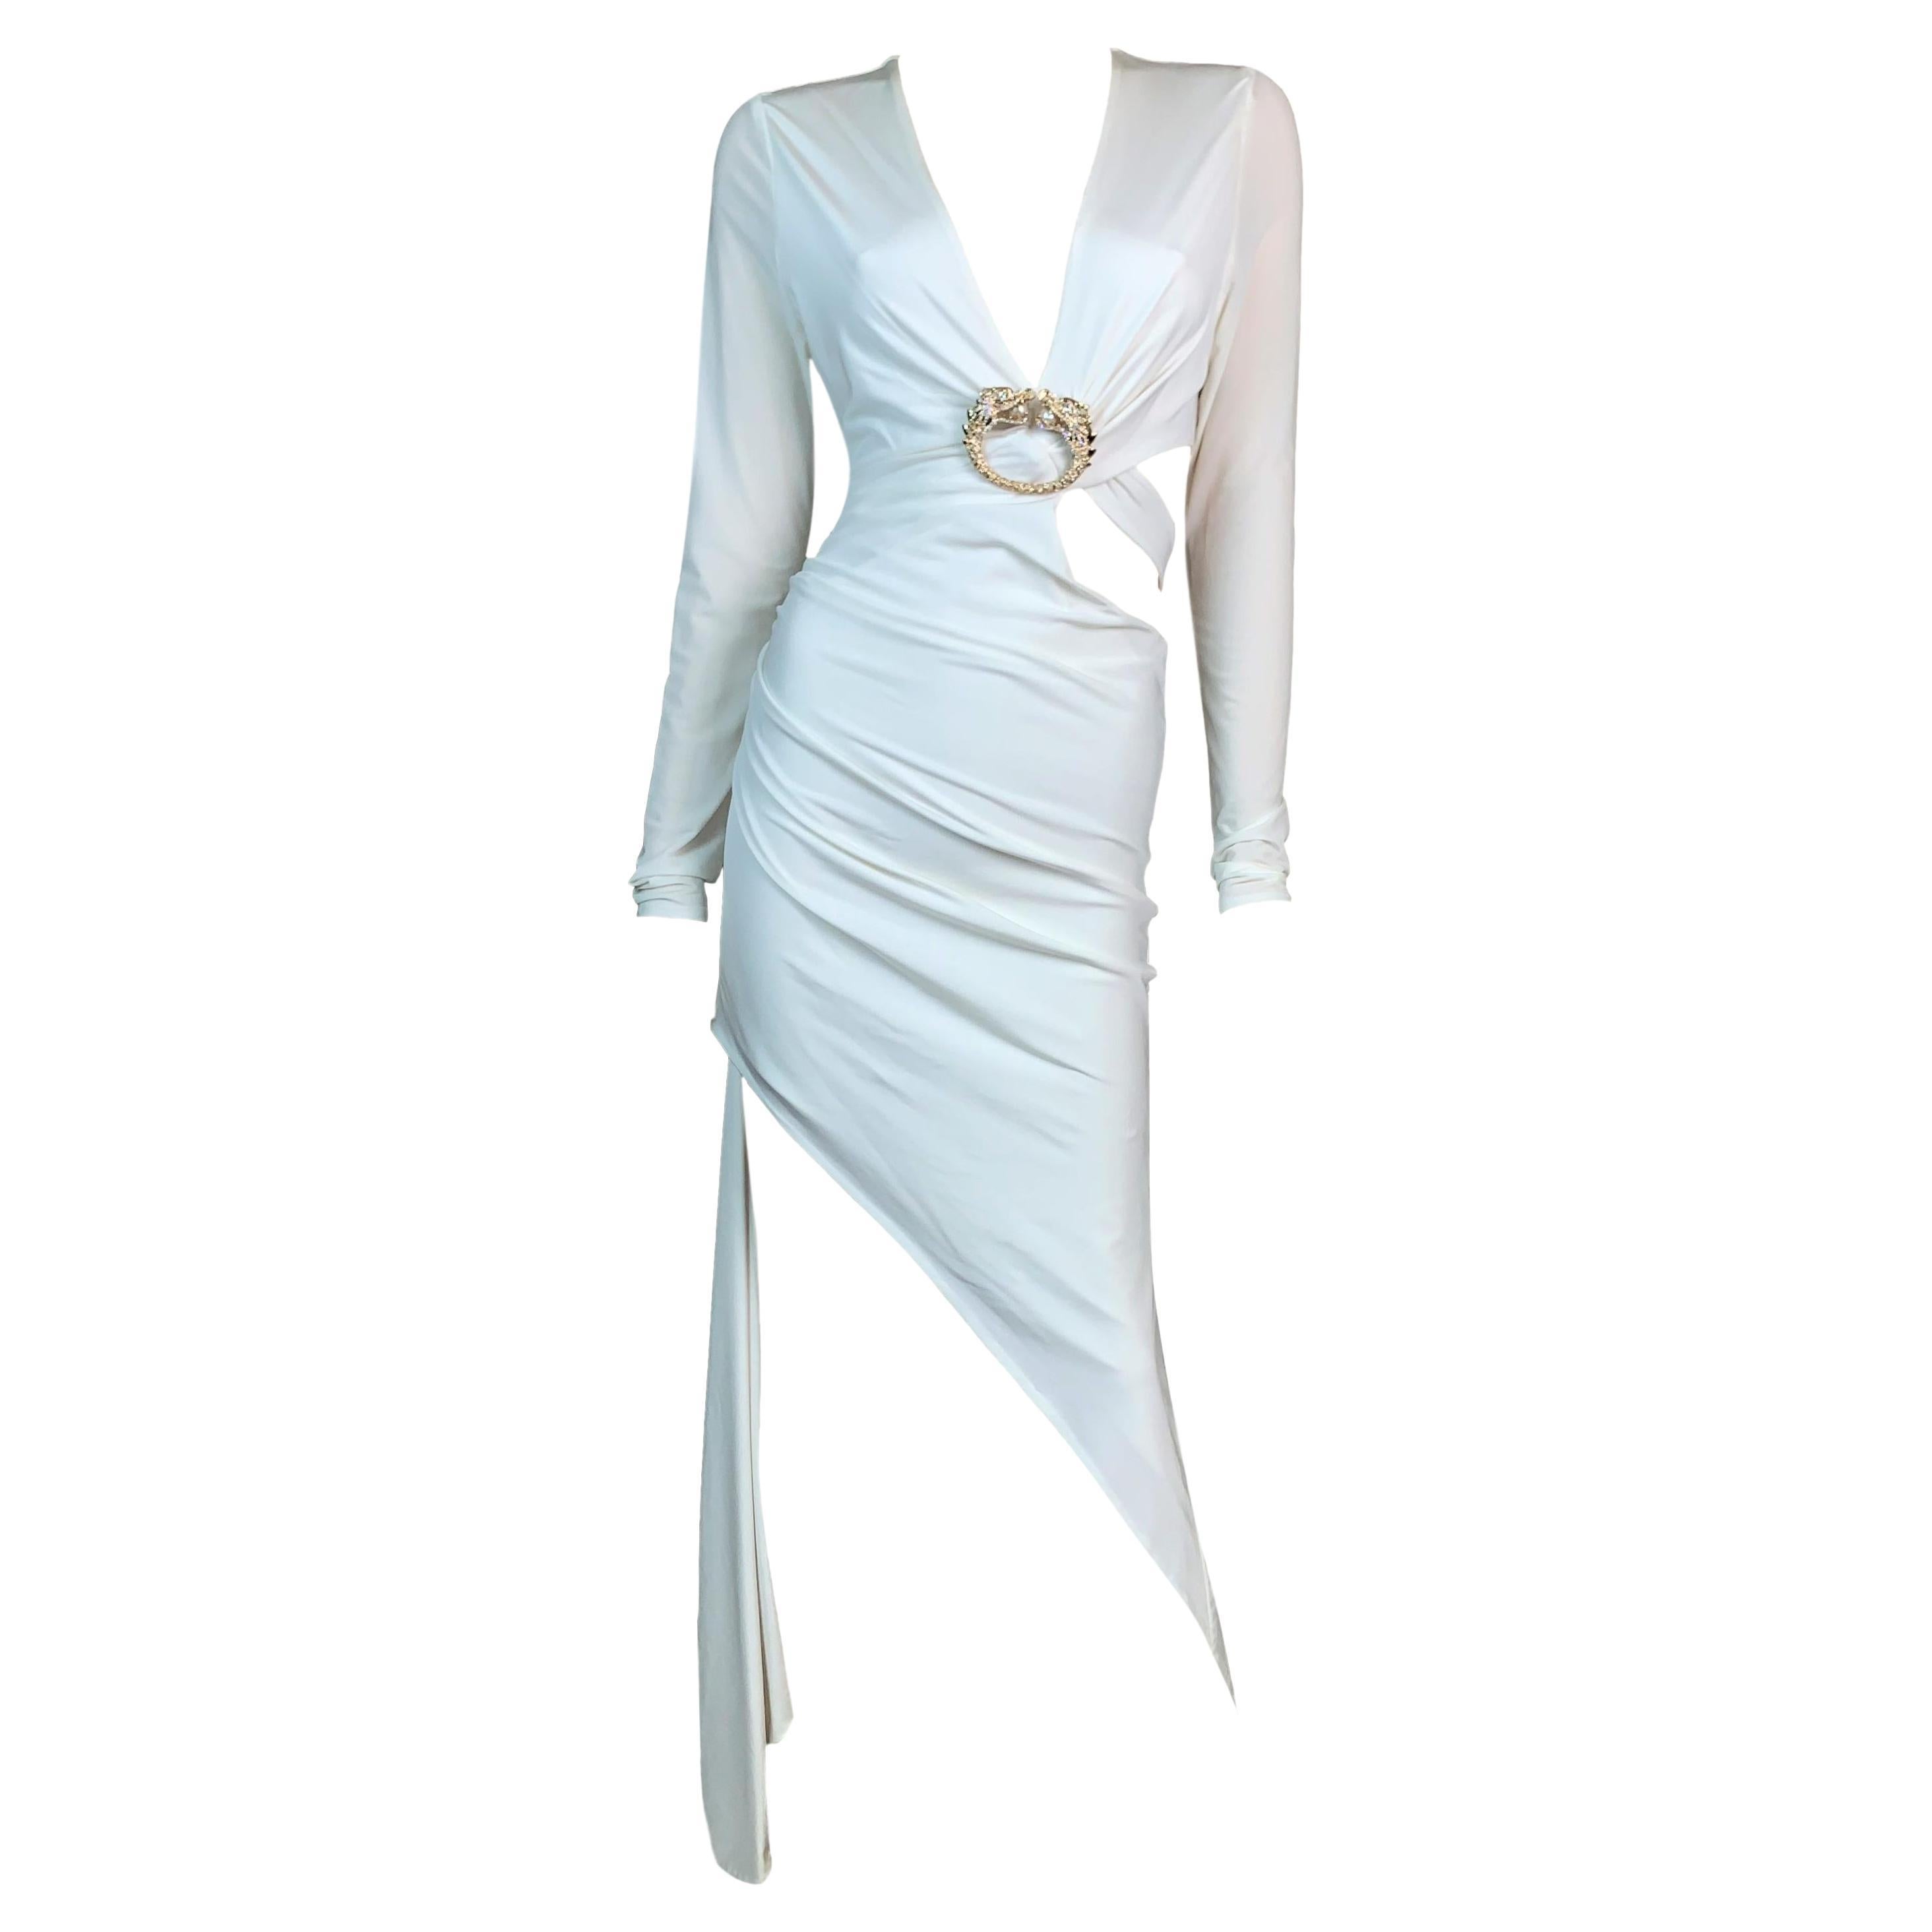 F/W 2004 Gucci by Tom Ford White Plunging Dragon Gown Dress